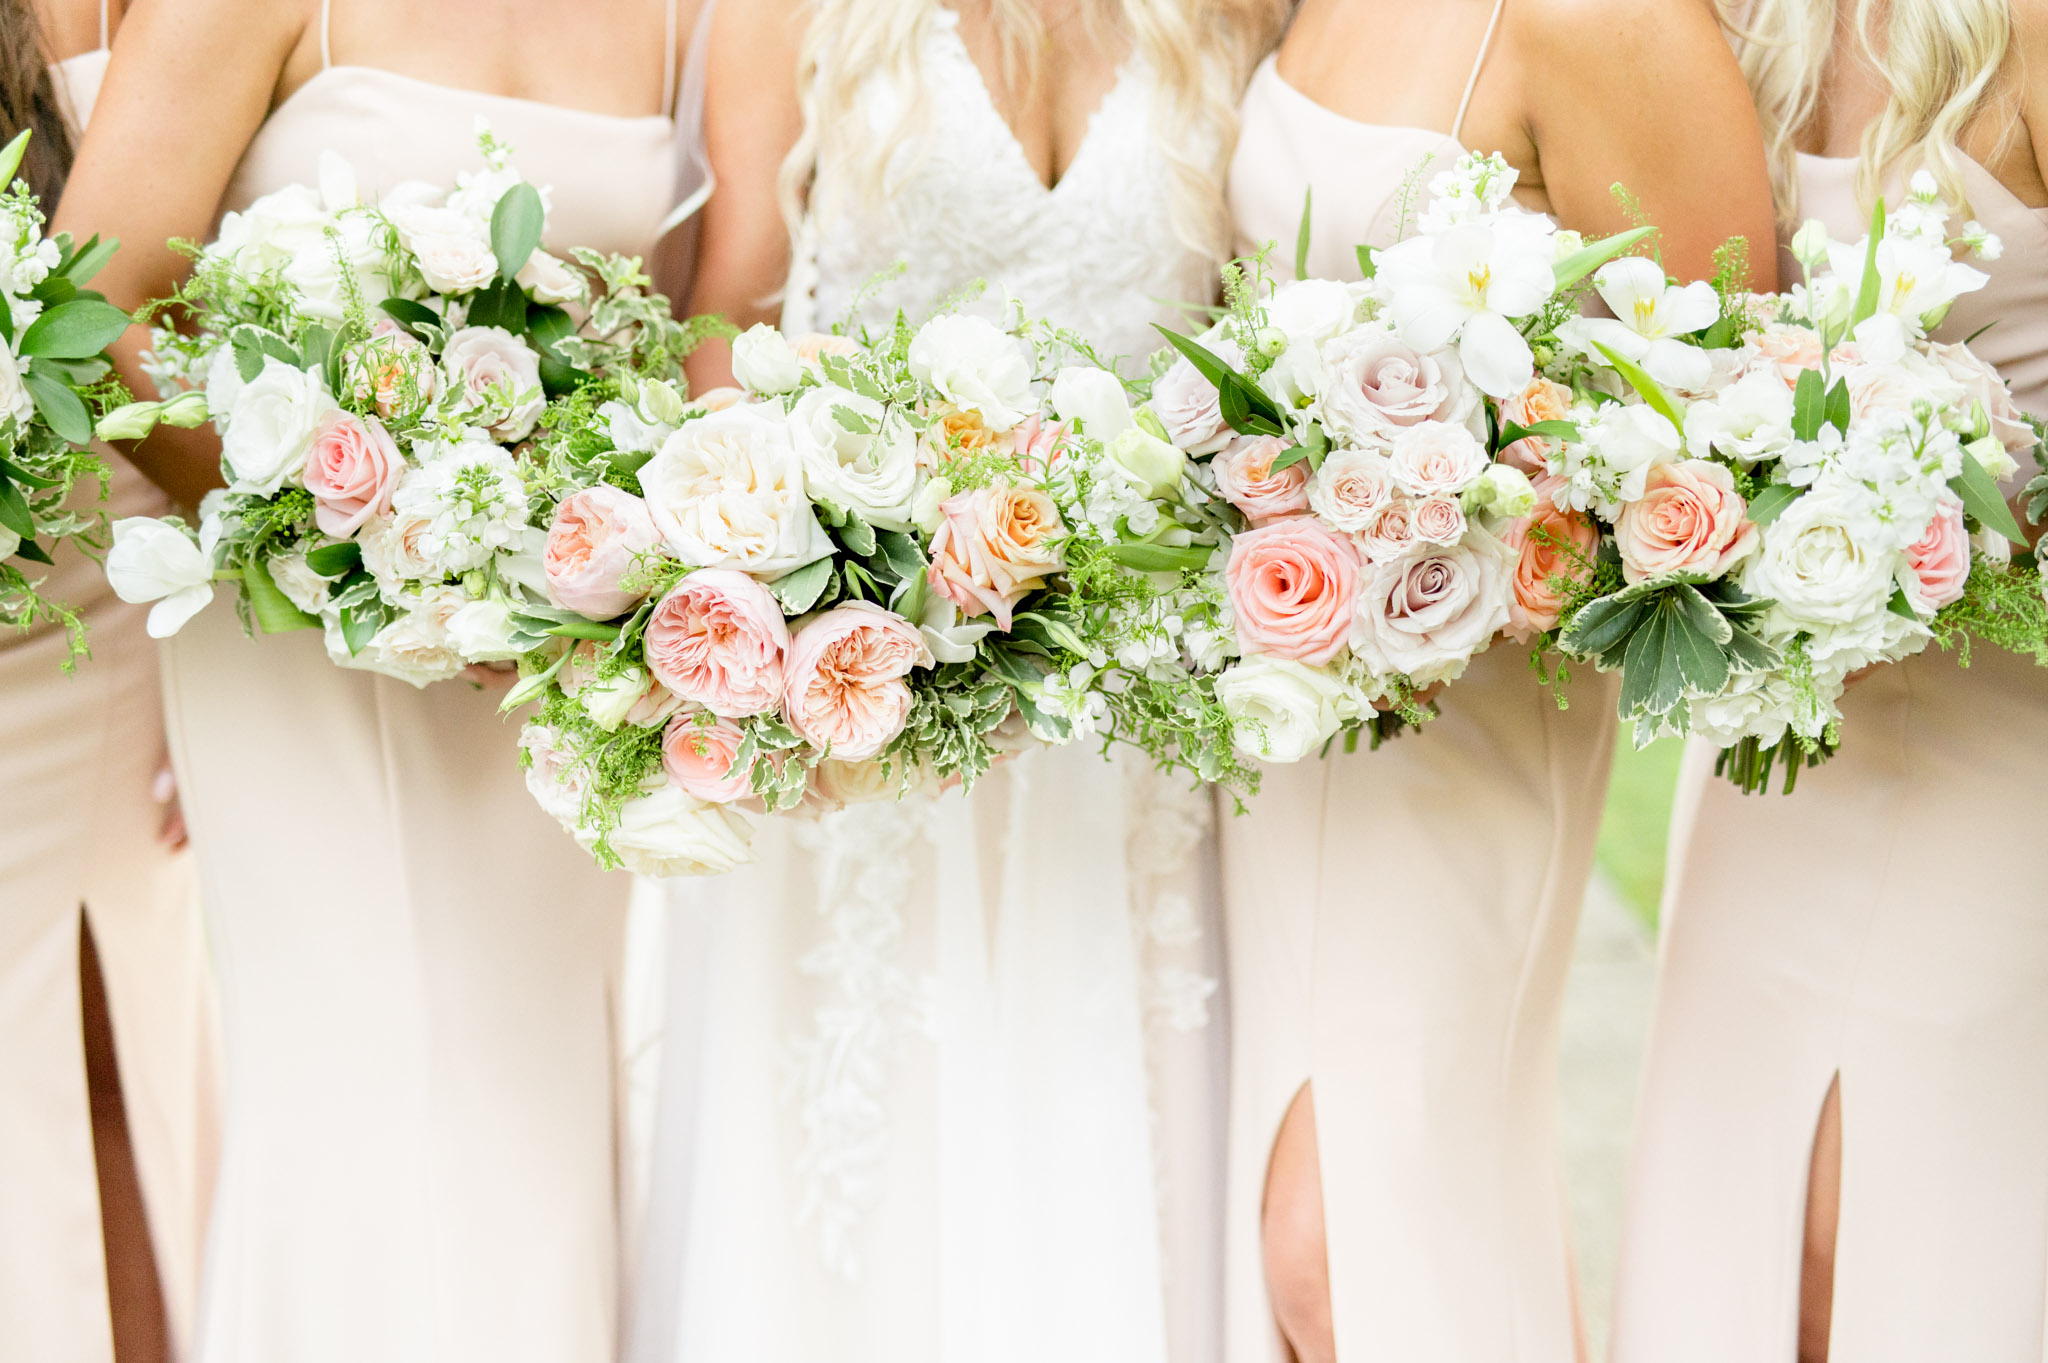 Pink and white flowers held by bridal party.